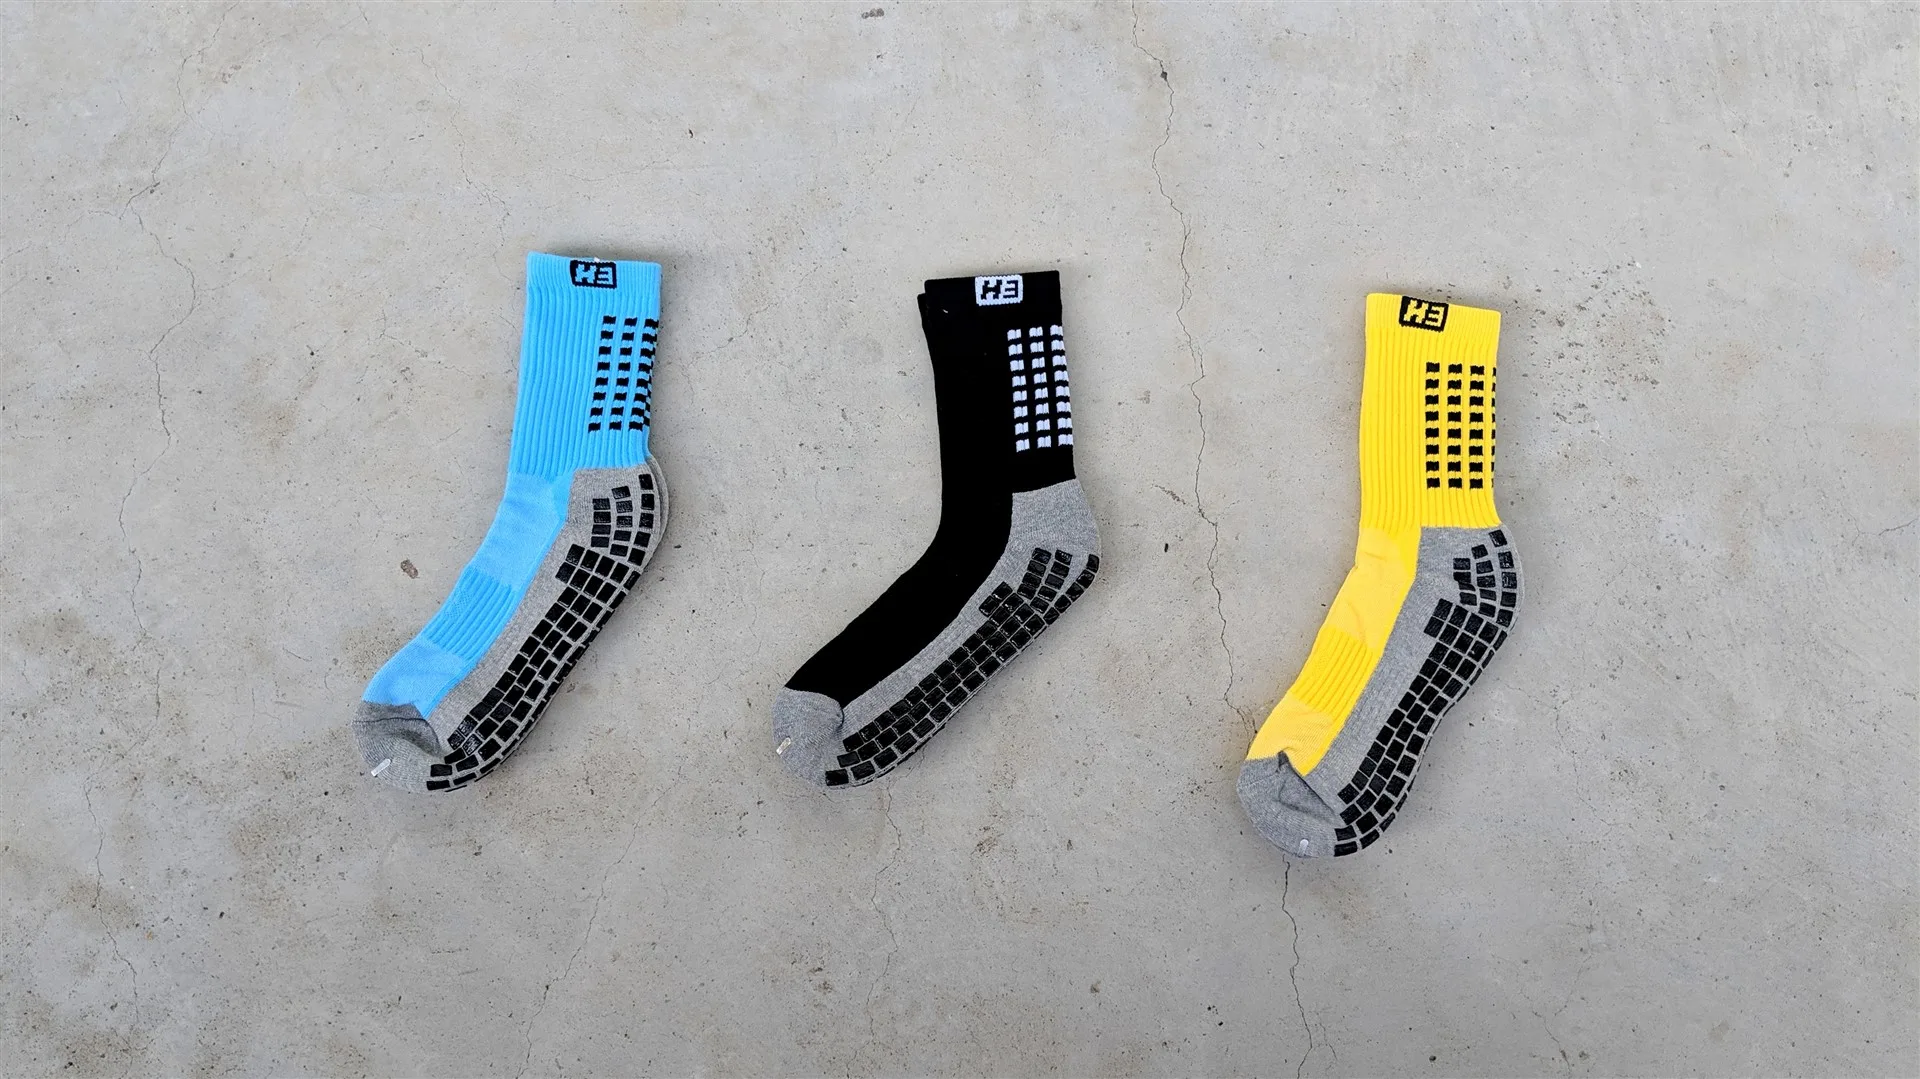 H3 Superb Socks Review: The grippiest football socks ever